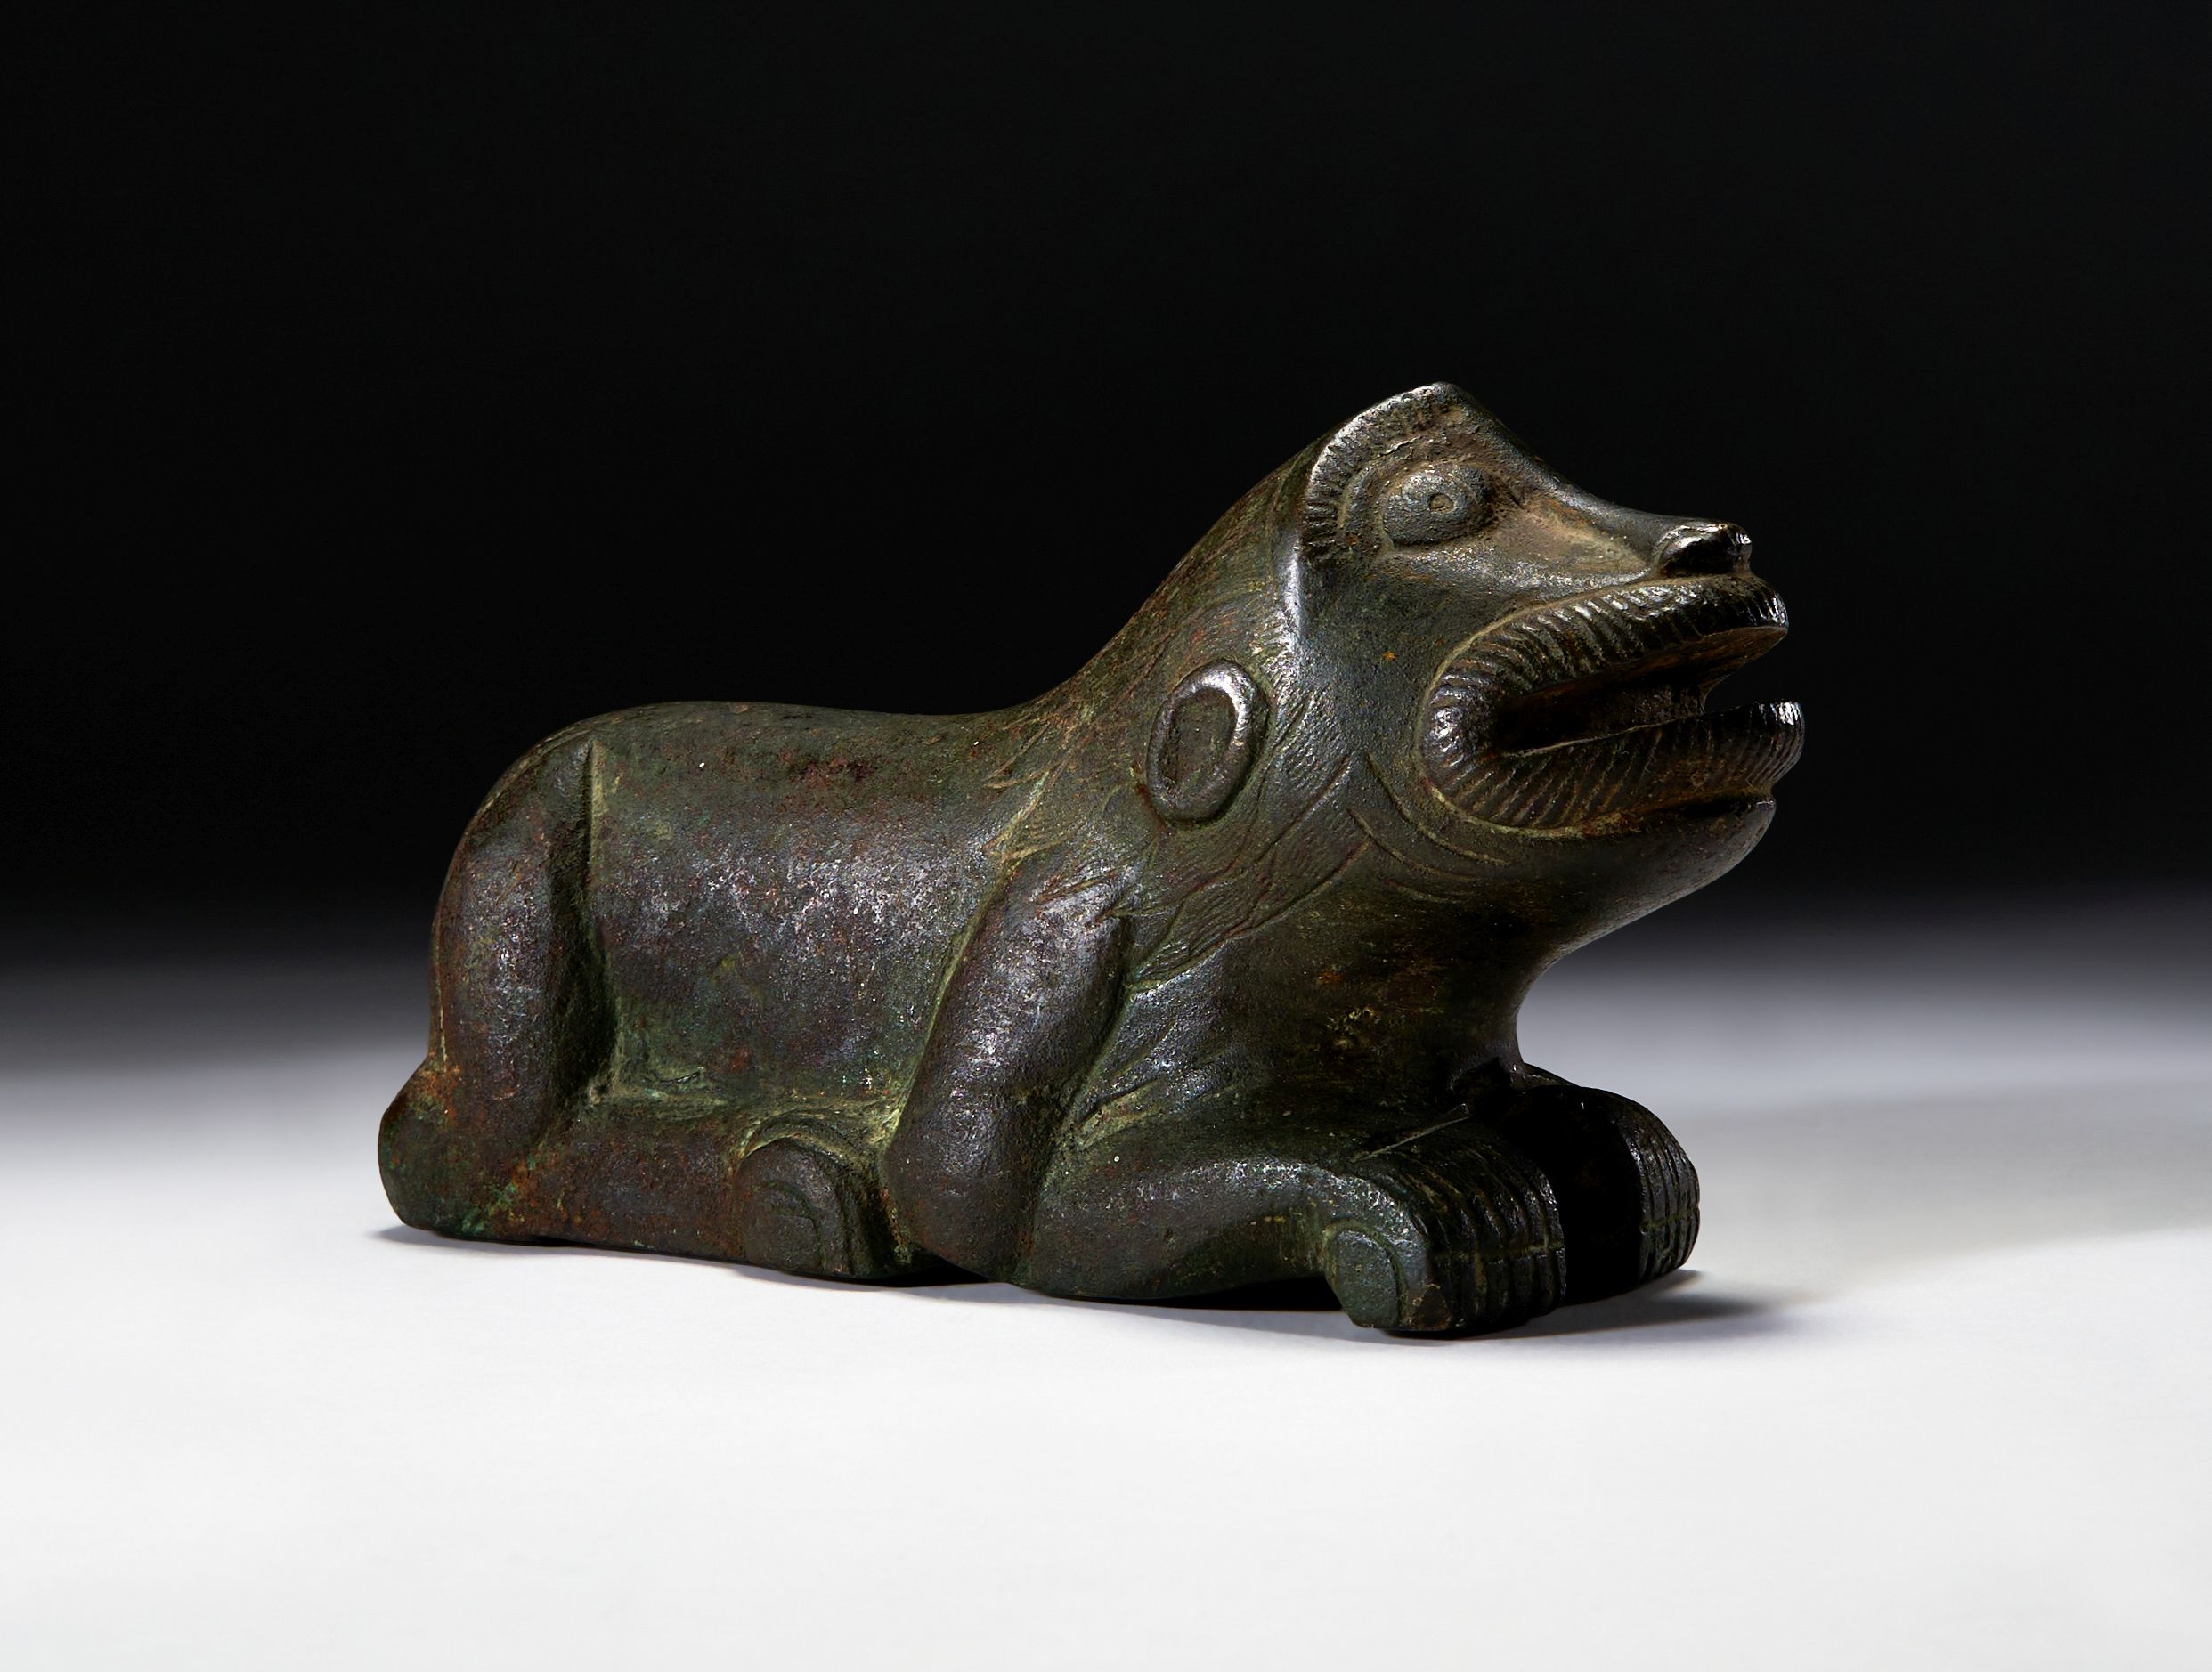 A LARGE BRONZE WEIGHT IN THE FORM OF A FELINE, PROBABLY SICILIAN OR SPANISH